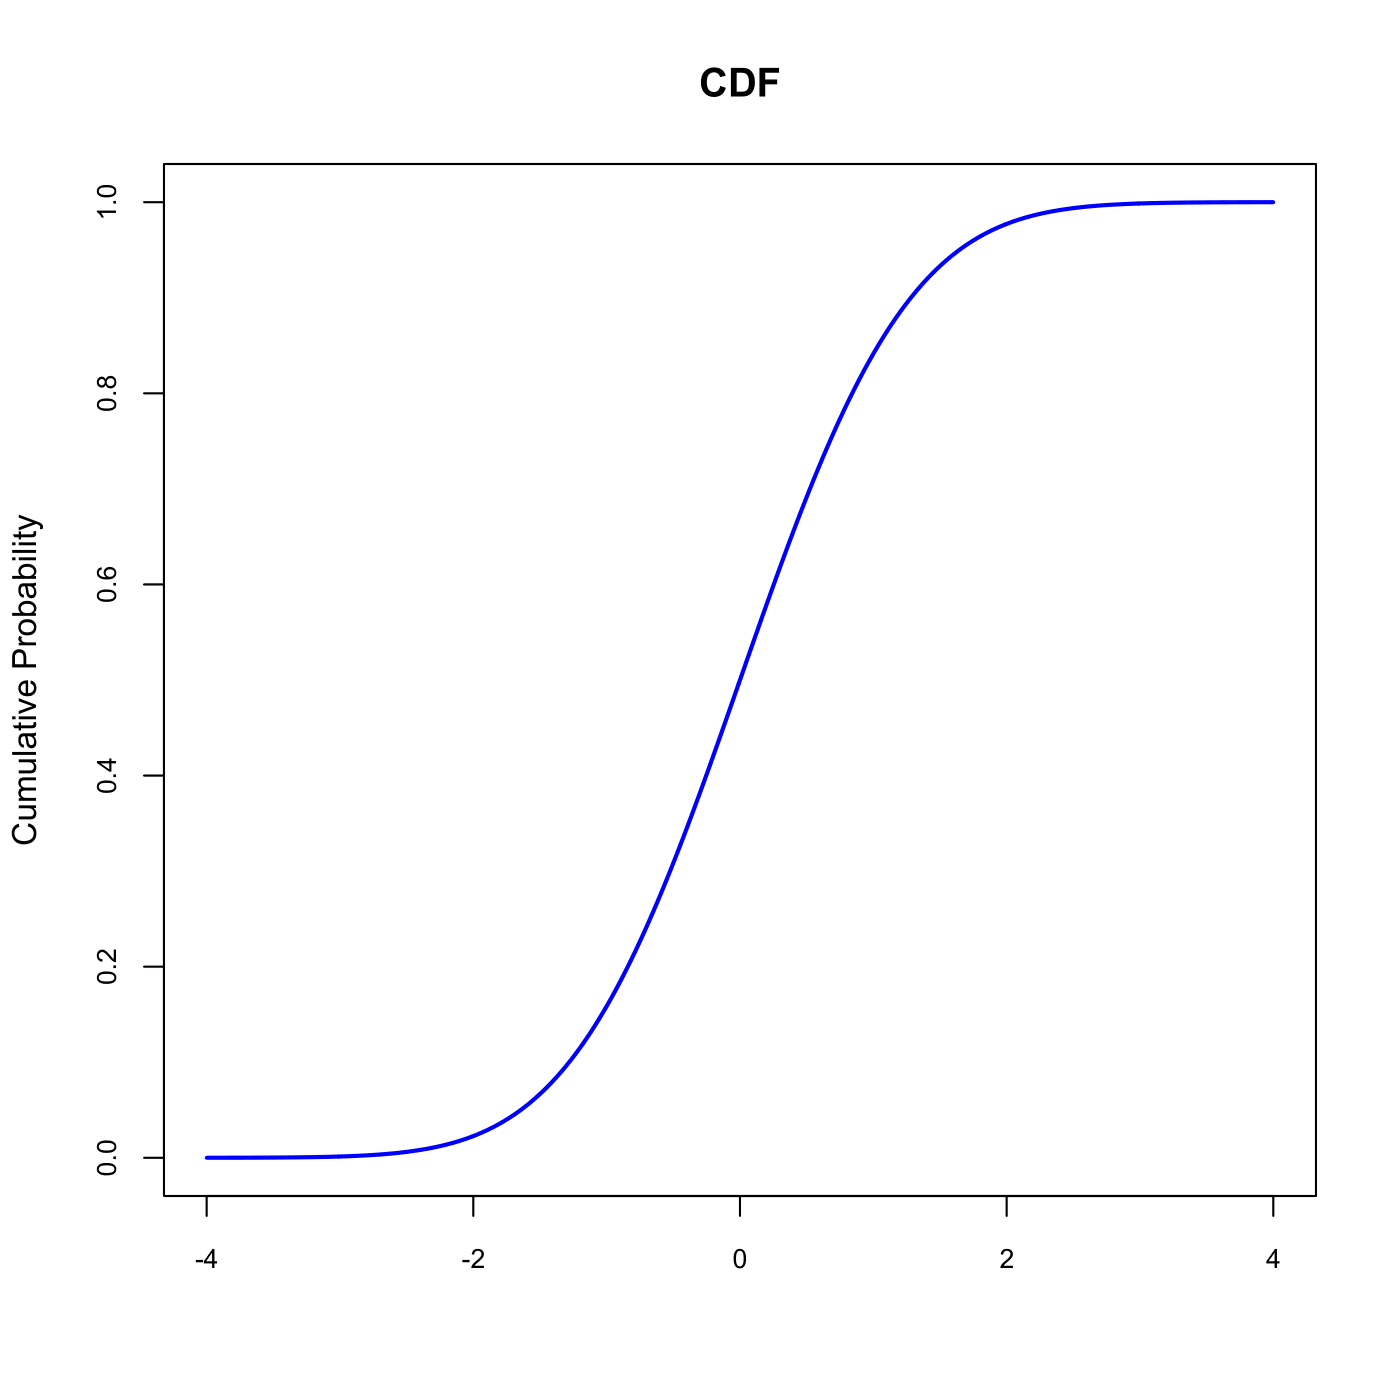 A typical S-shaped Cumulative Distribution Function